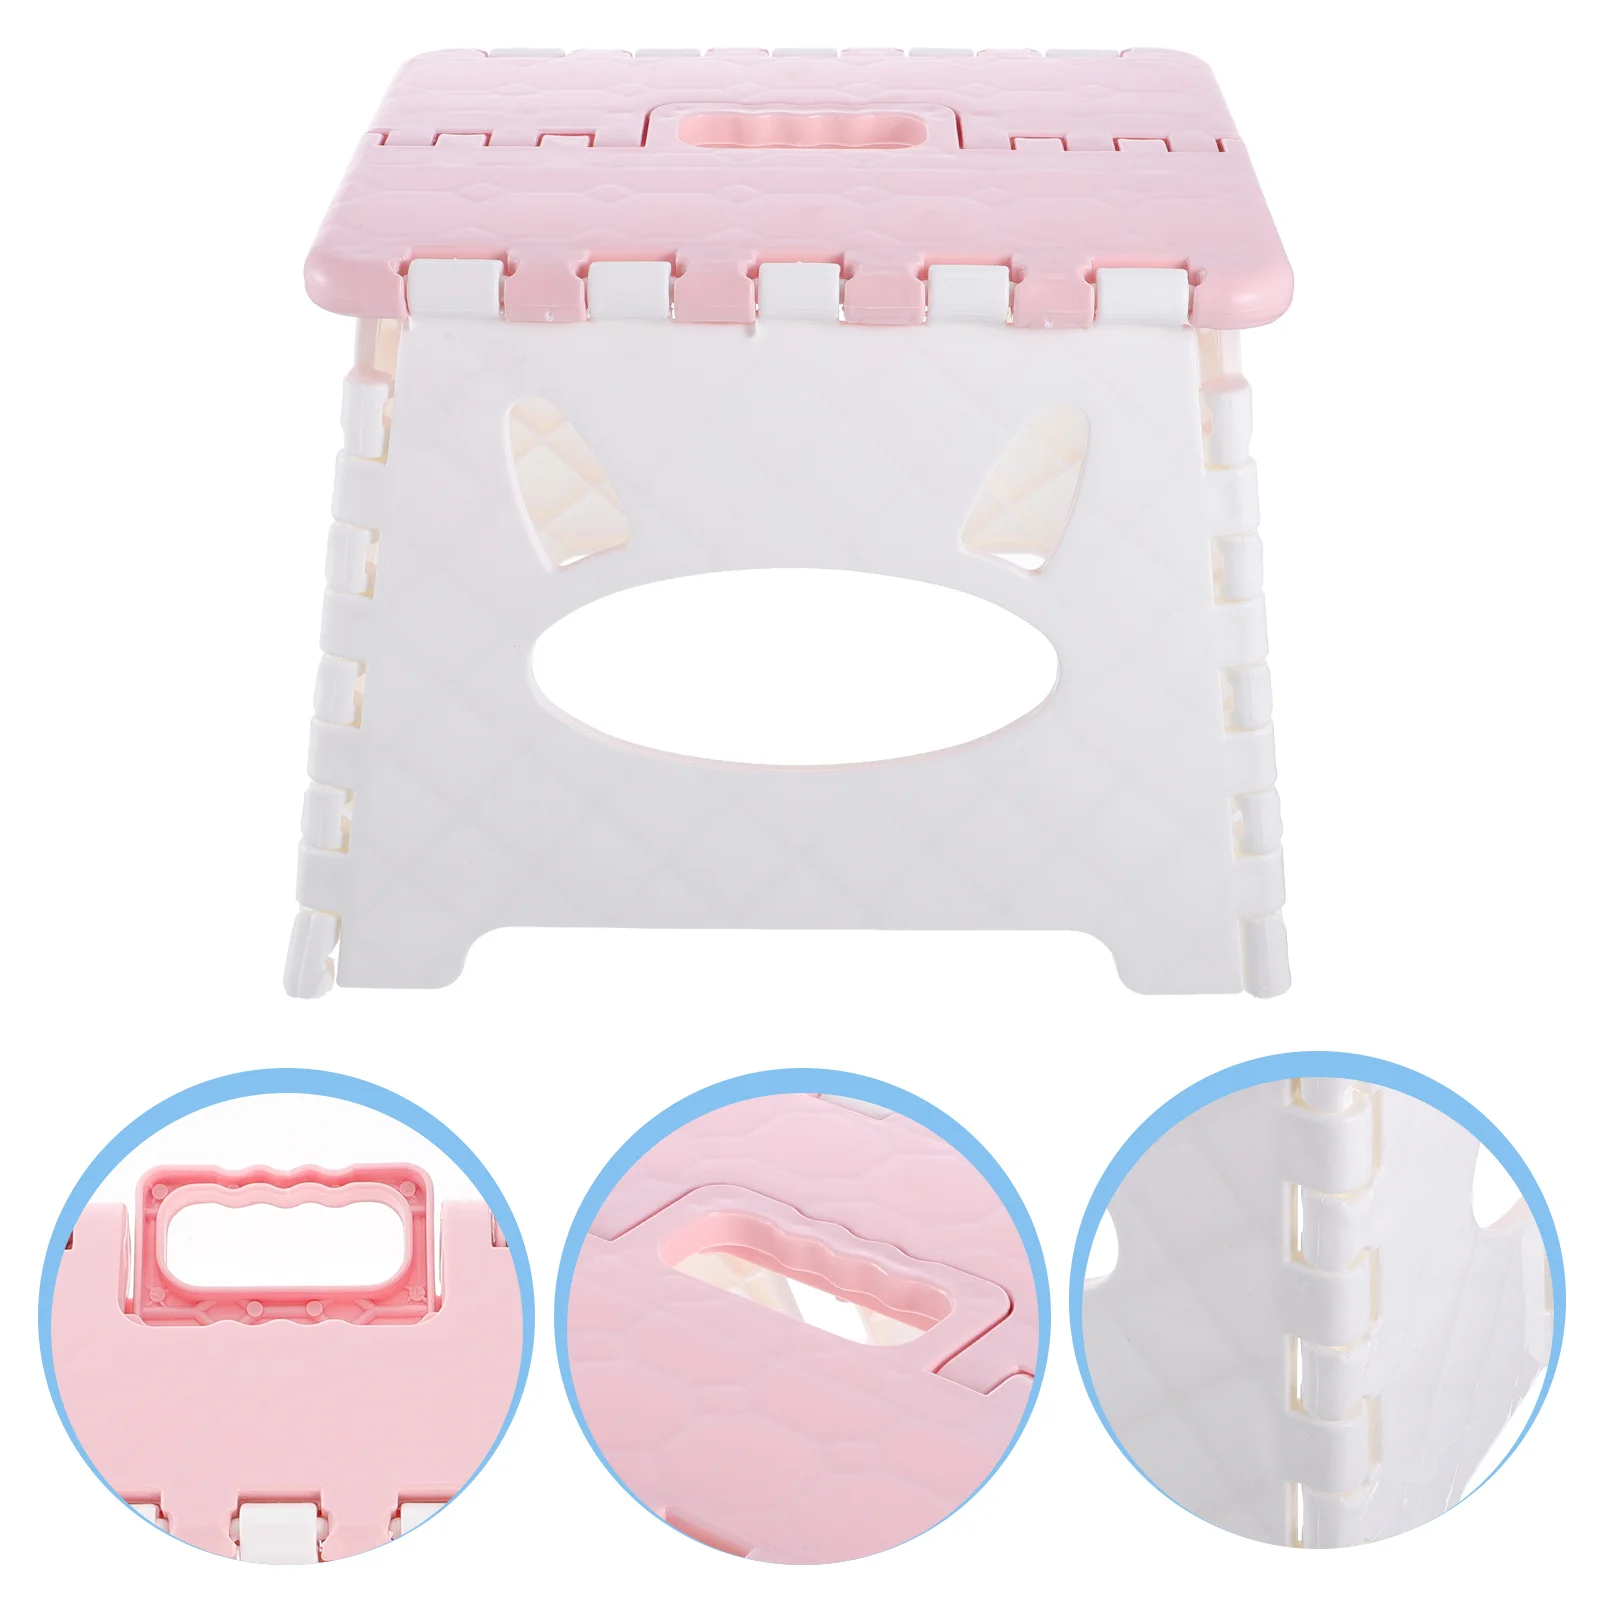 

Stool Step Folding Foldable Stools Compact Children Adult Plastics Plastic Kids Lightweight Collapsible Stepping Training Potty